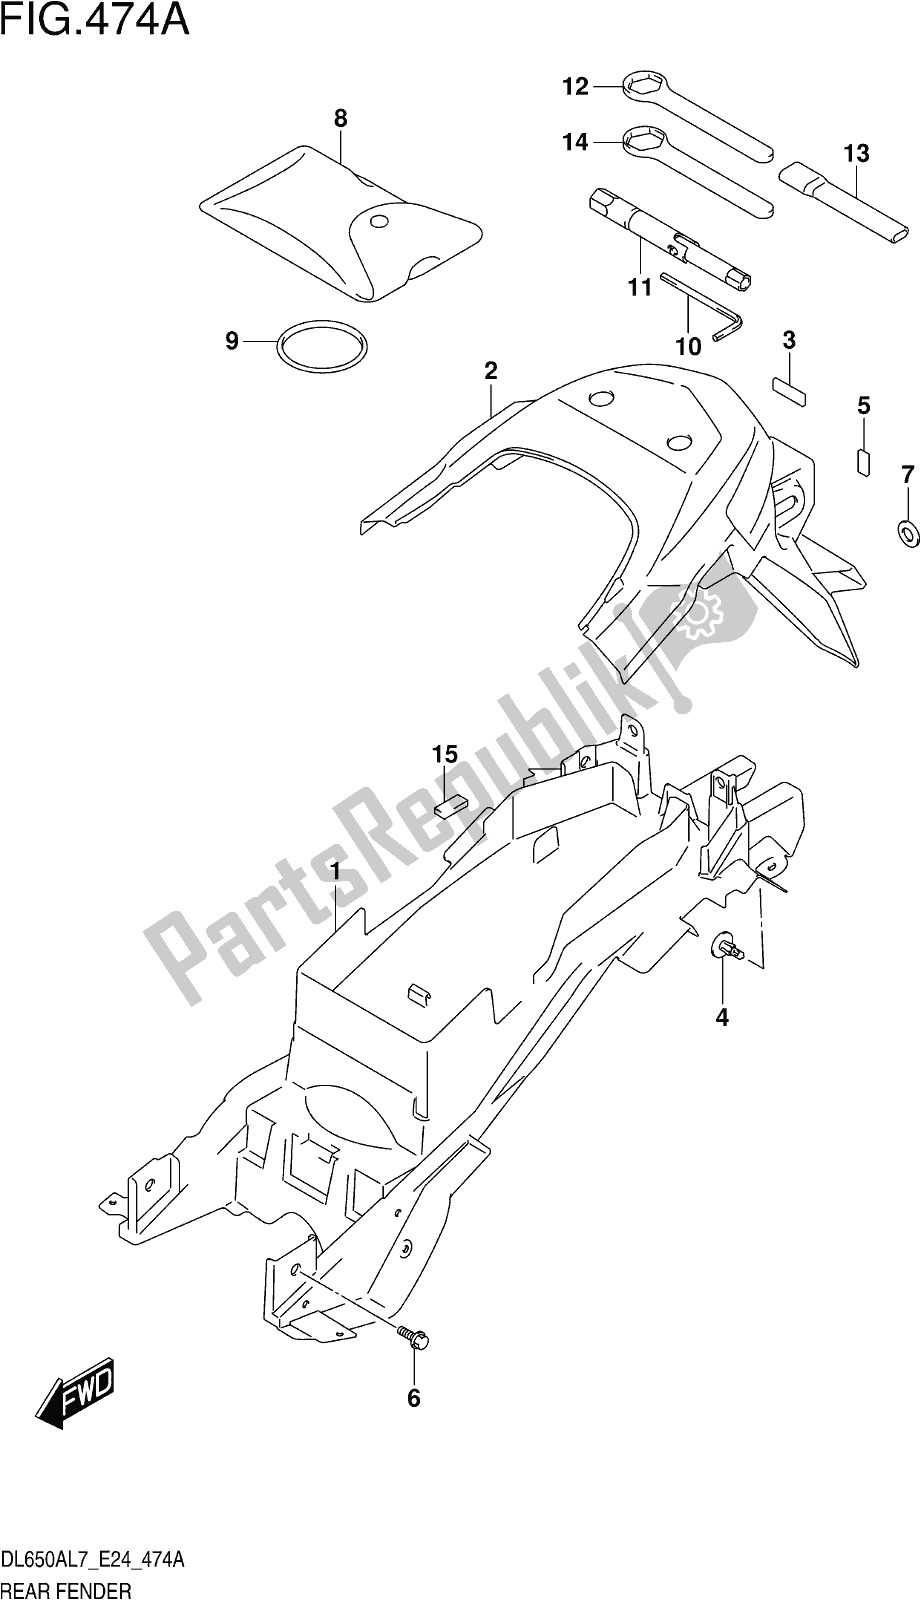 All parts for the Fig. 474a Rear Fender of the Suzuki DL 650 XA V Strom 2017